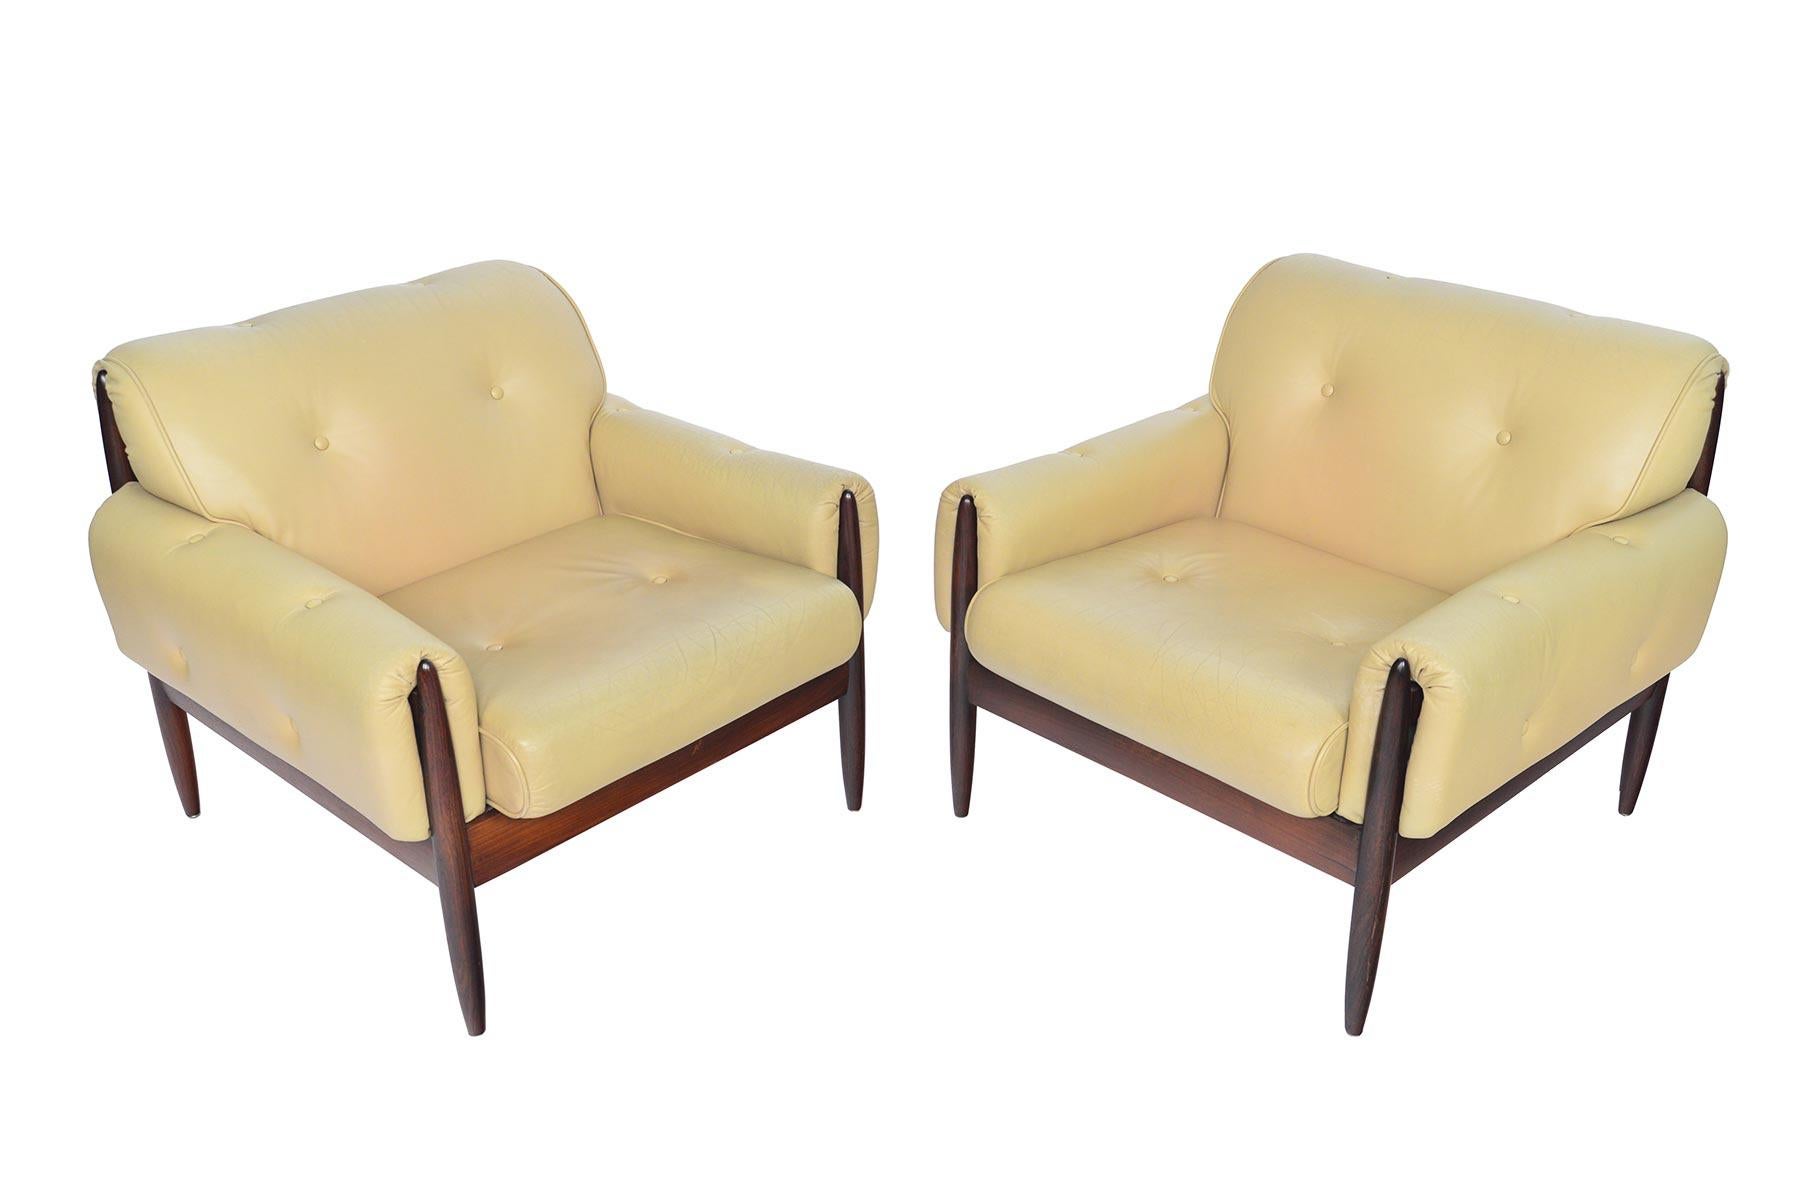 This beautiful pair of Brazilian rosewood lounge chairs offer an elegant silhouette with exceptional wood trim. Upholstered on all sides, this pair features large sculpted rosewood frame. The pair wear their original cream leather cushions. The